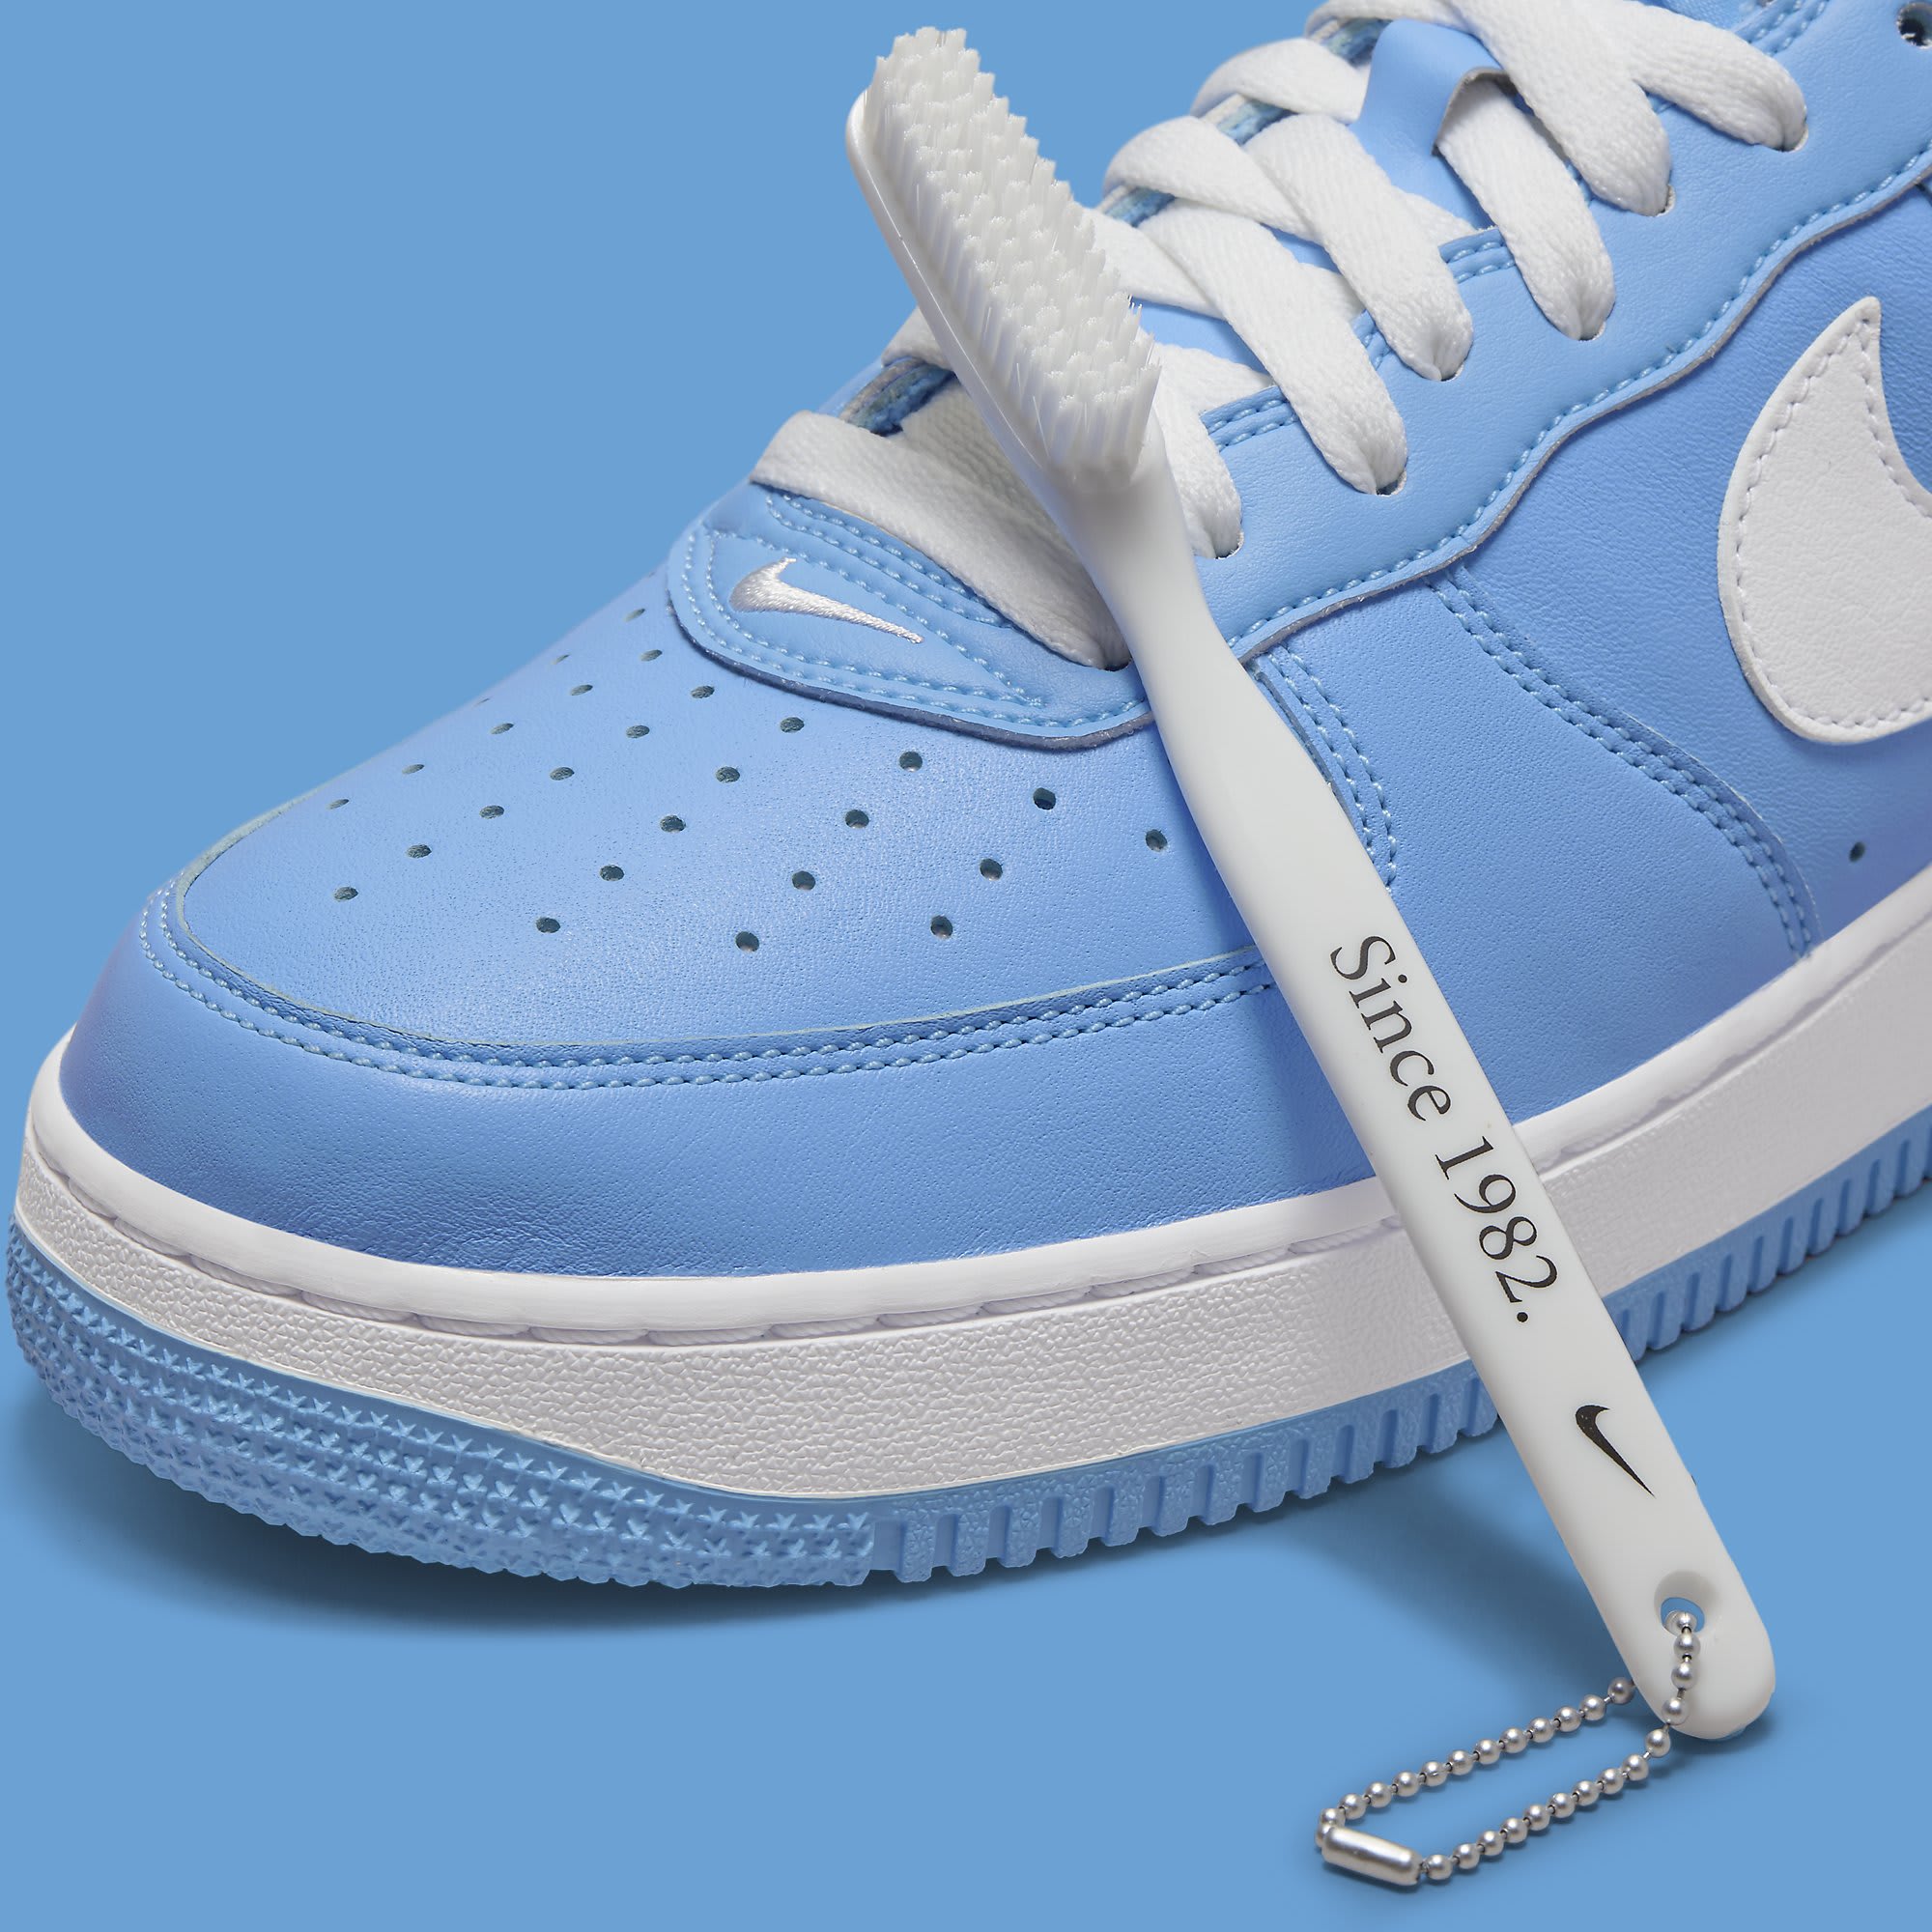 Nike Air Force 1 Low University Blue 'Color of the Month' DM0576 400 Toothbrush